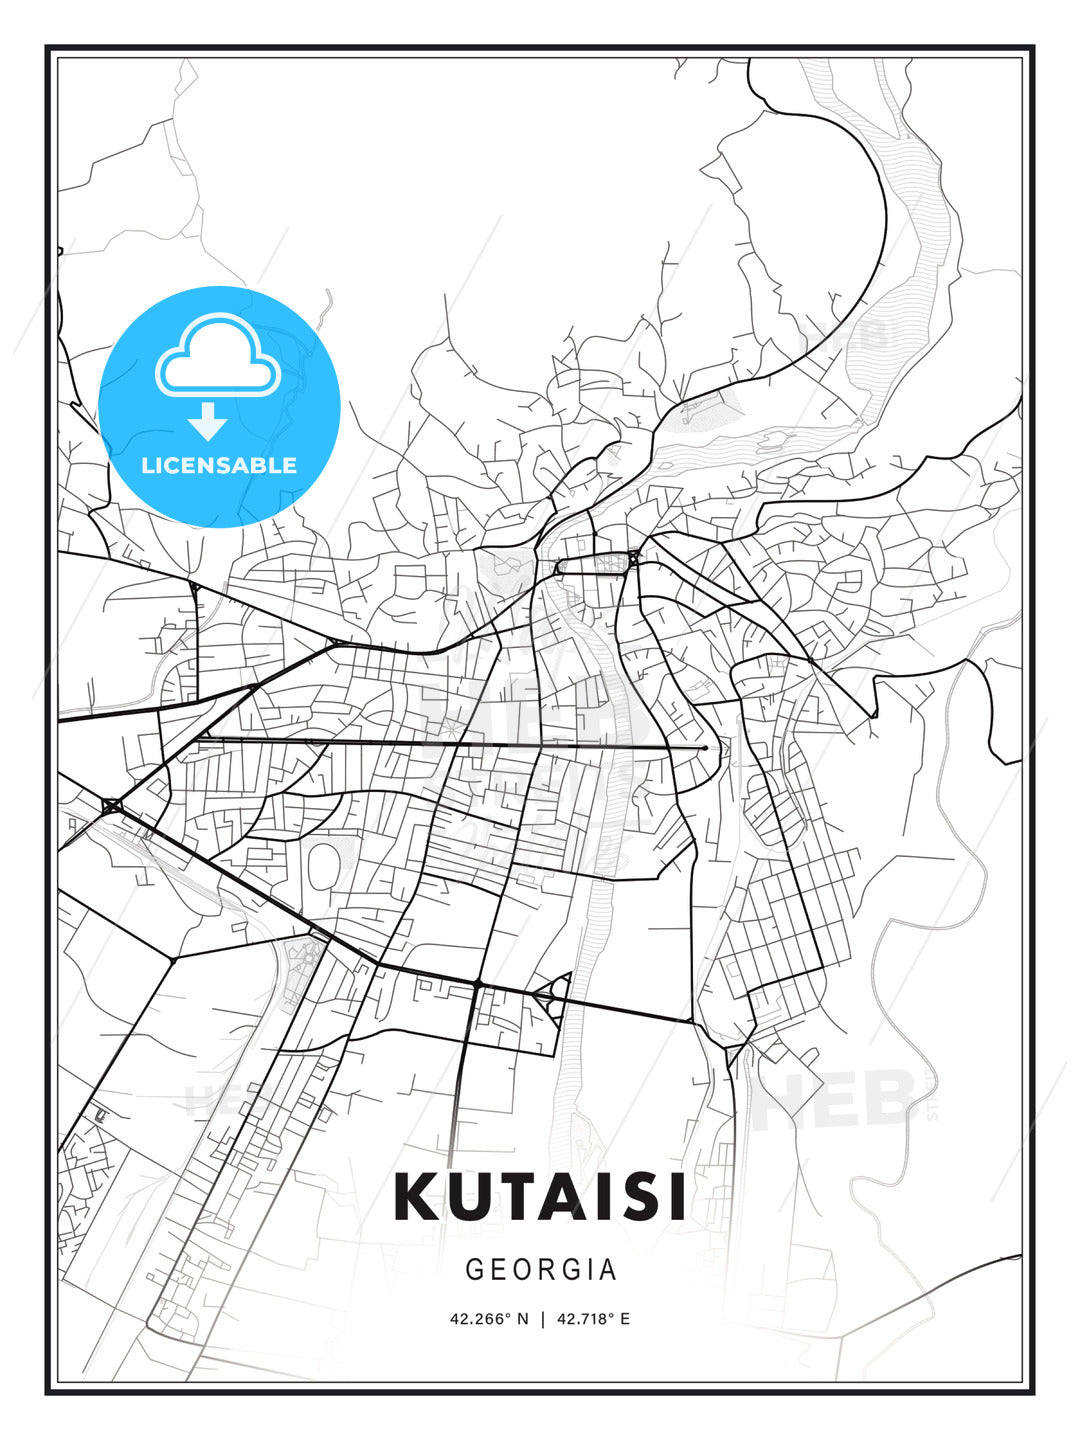 Kutaisi, Georgia, Modern Print Template in Various Formats - HEBSTREITS Sketches